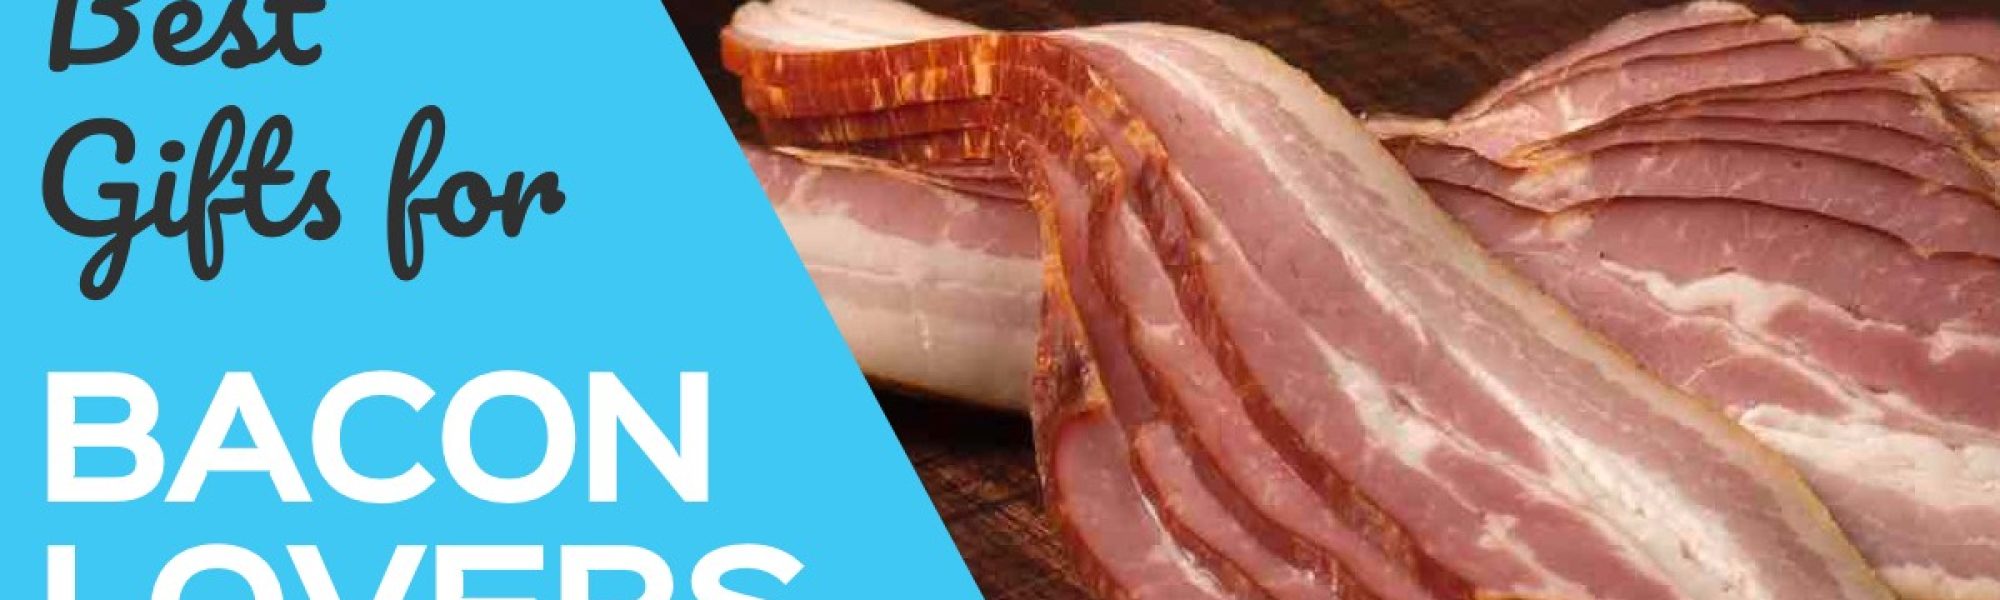 Best Gifts for Bacon Lovers 2018 - Your Guide to Finding the Right Gourmet Bacon Gift